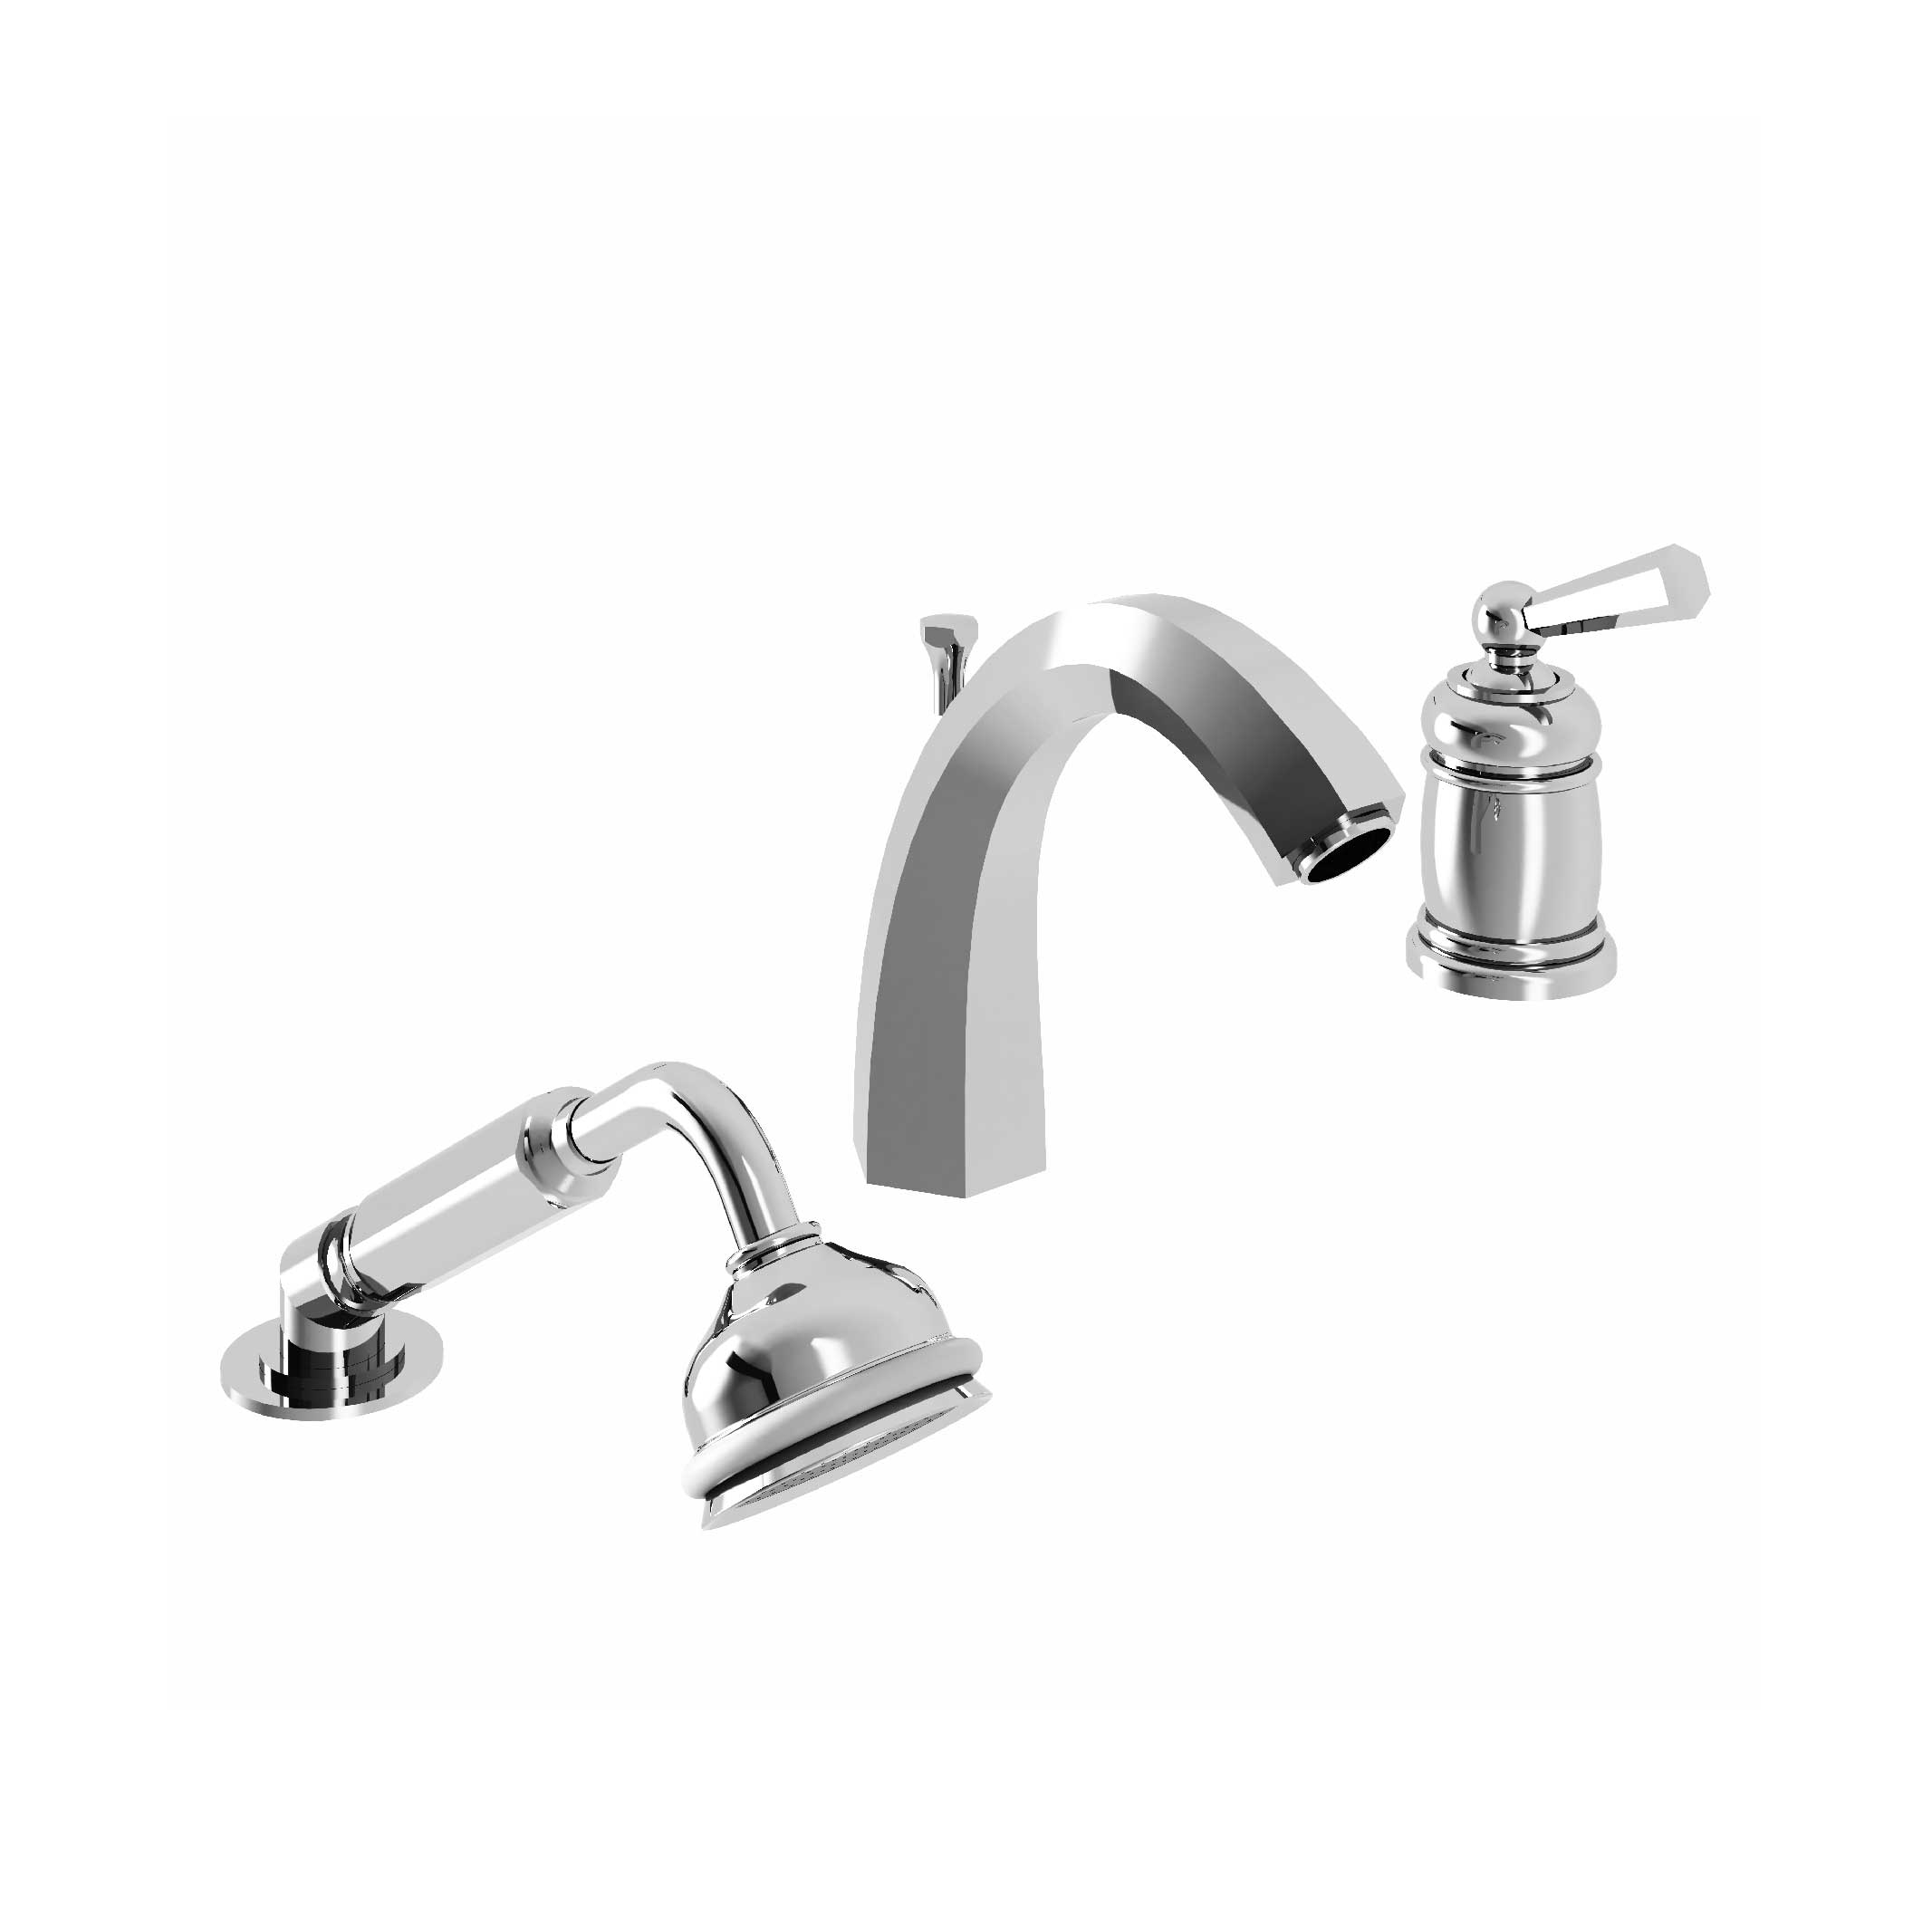 M39-3301MH 3-hole single-lever bath and shower mixer, high spout